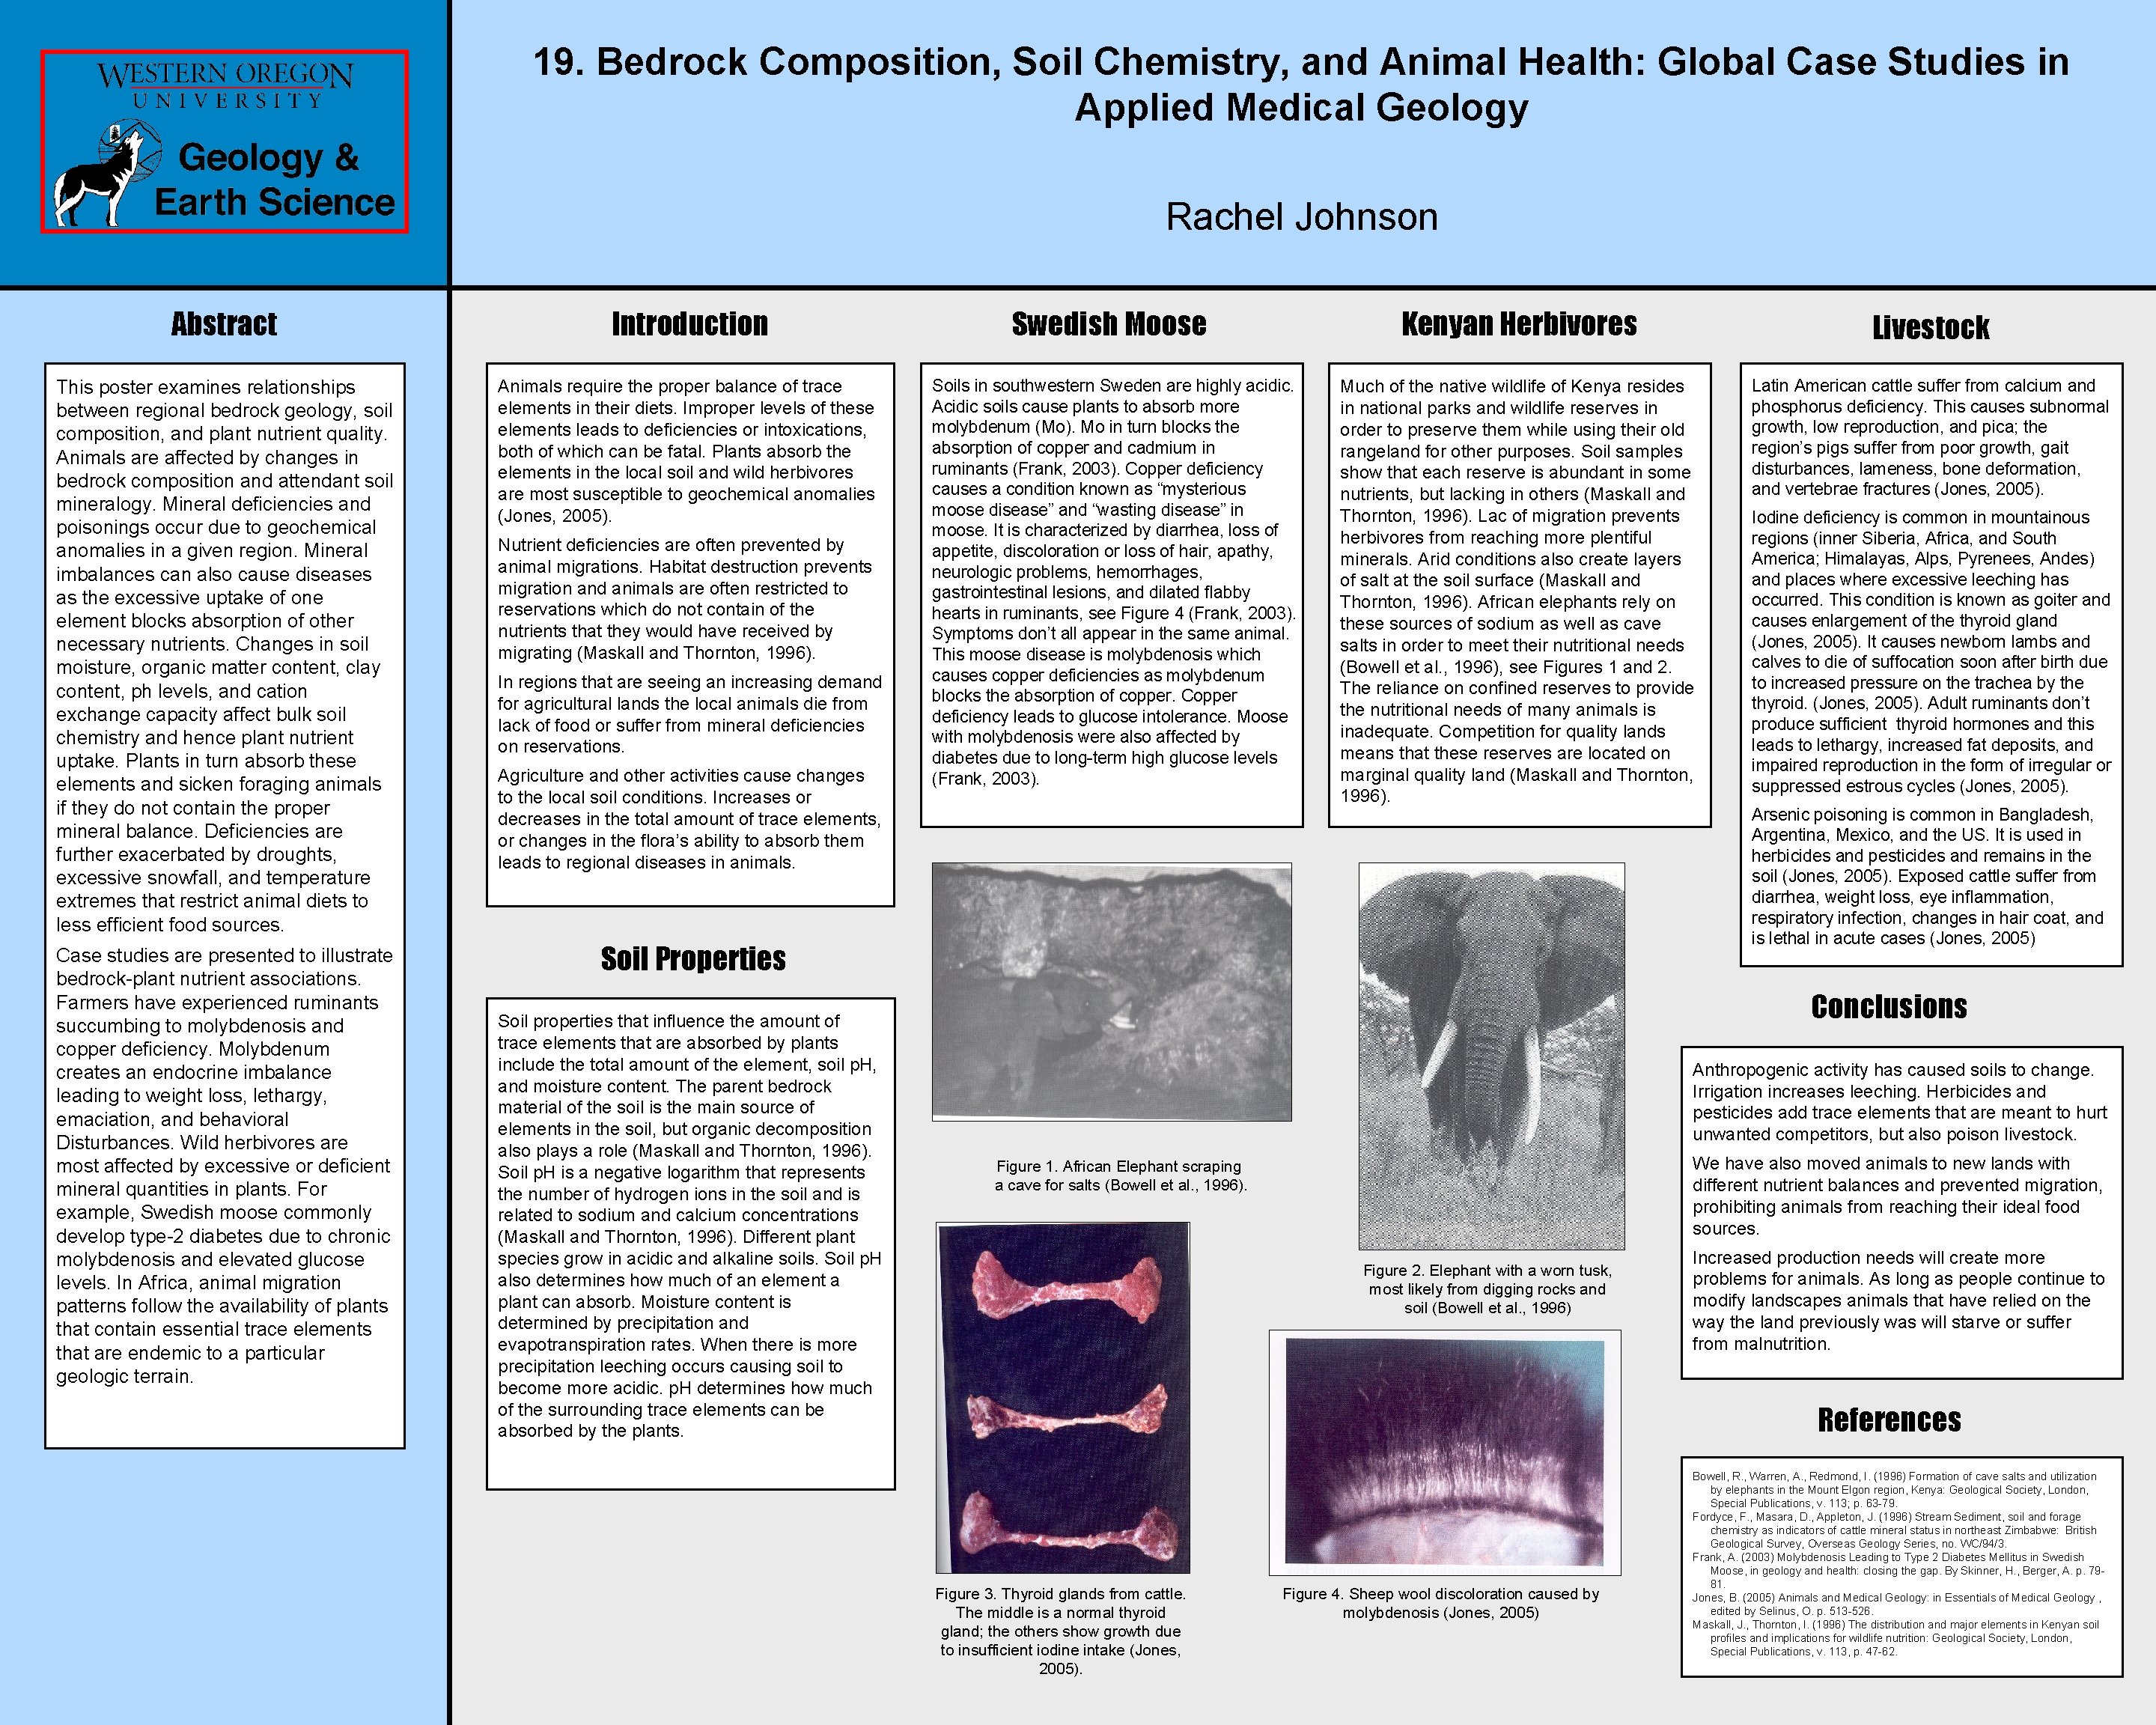 19. Bedrock Composition, Soil Chemistry, and Animal Health: Global Case Studies in Applied Medical